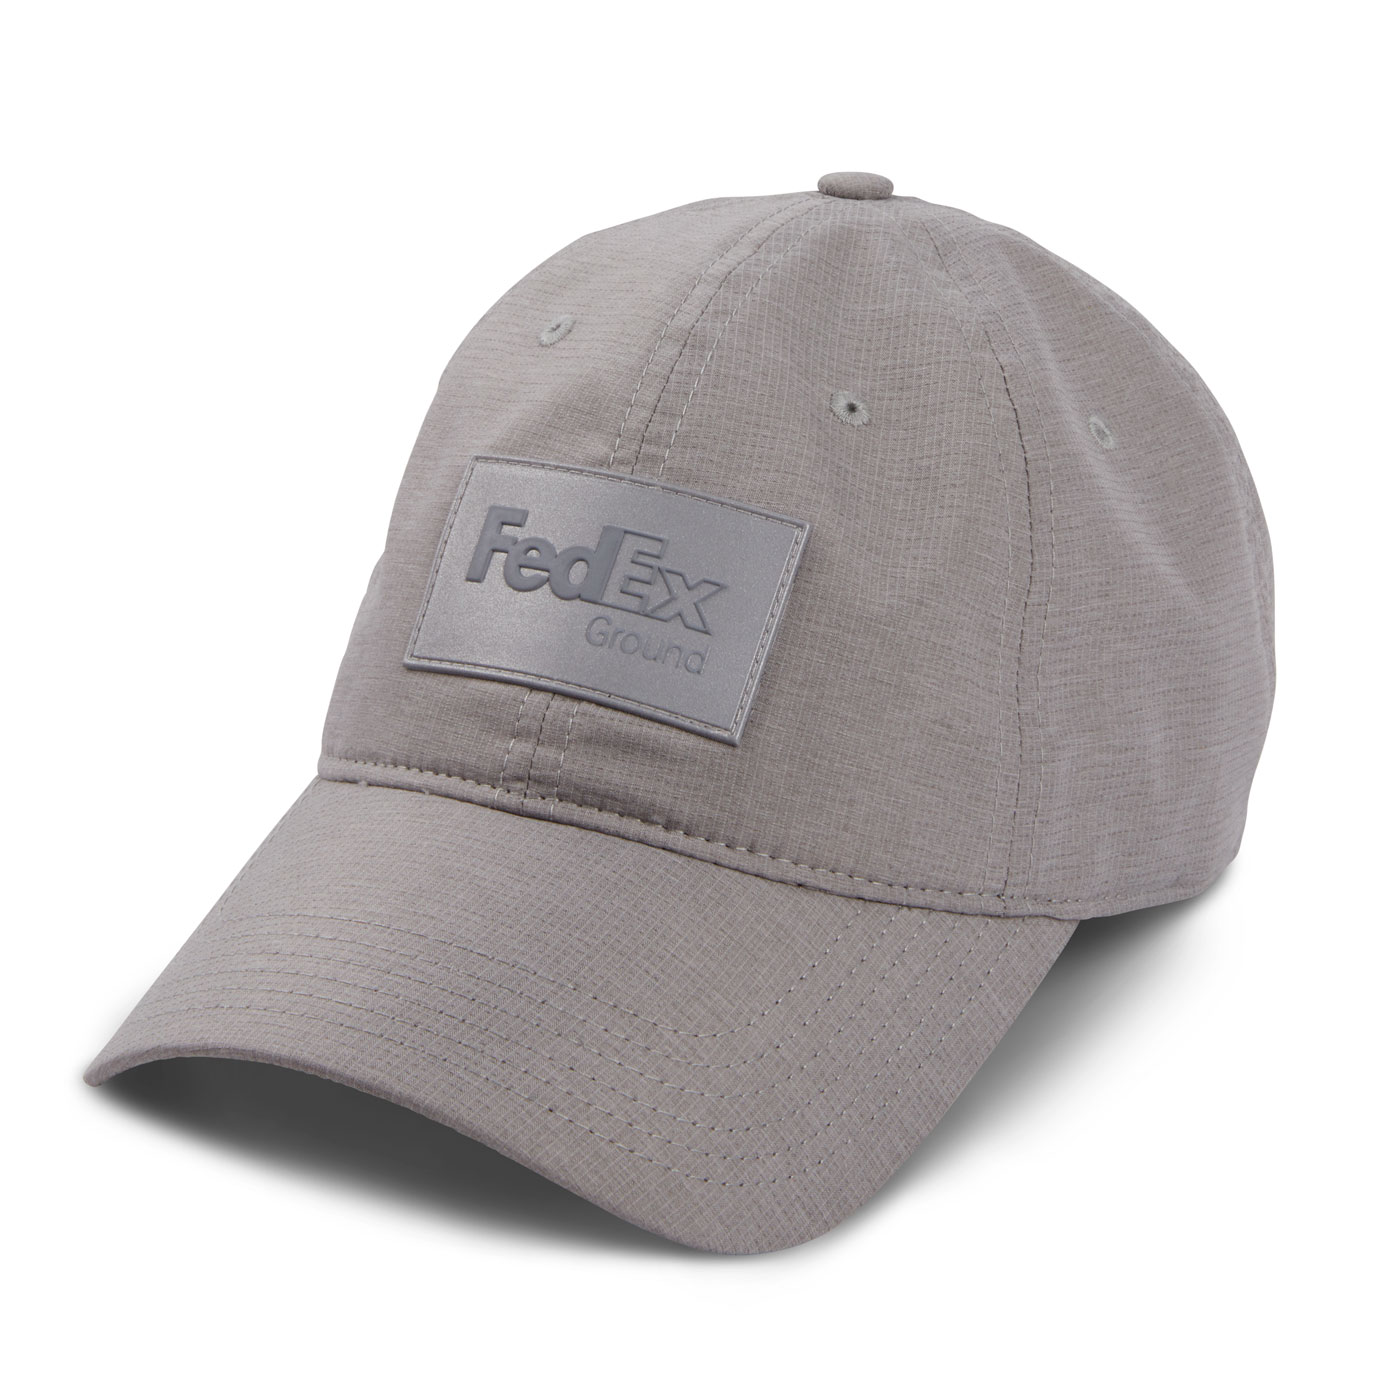 FedEx Ground Shimmer Cap | The FedEx Company Store